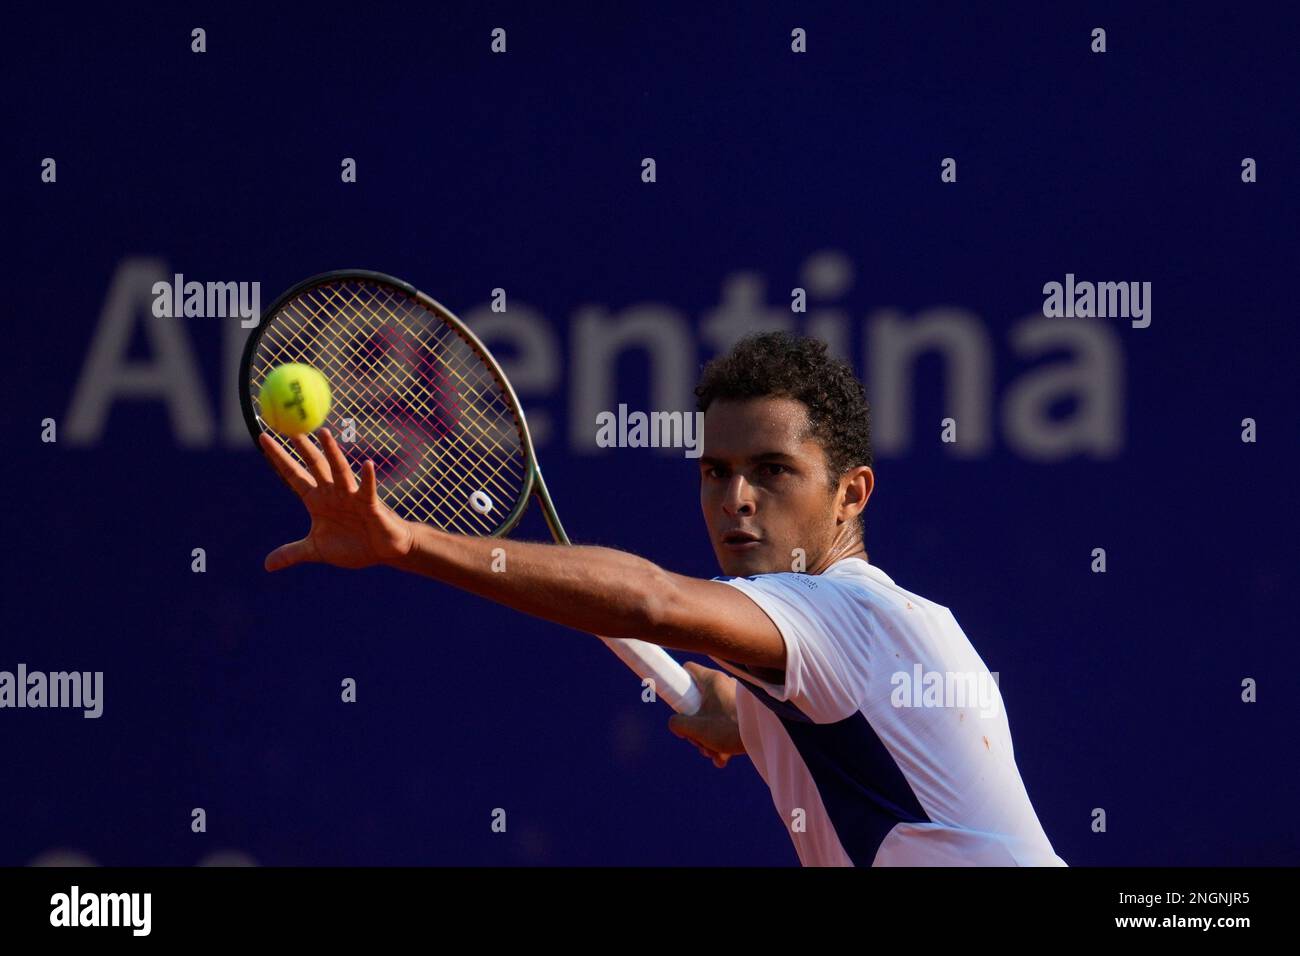 Juan Pablo Varillas, of Peru, returns the ball to Cameron Norrie, of Britain, during an Argentina Open ATP semifinals match, in Buenos Aires, Argentina, Saturday, Feb